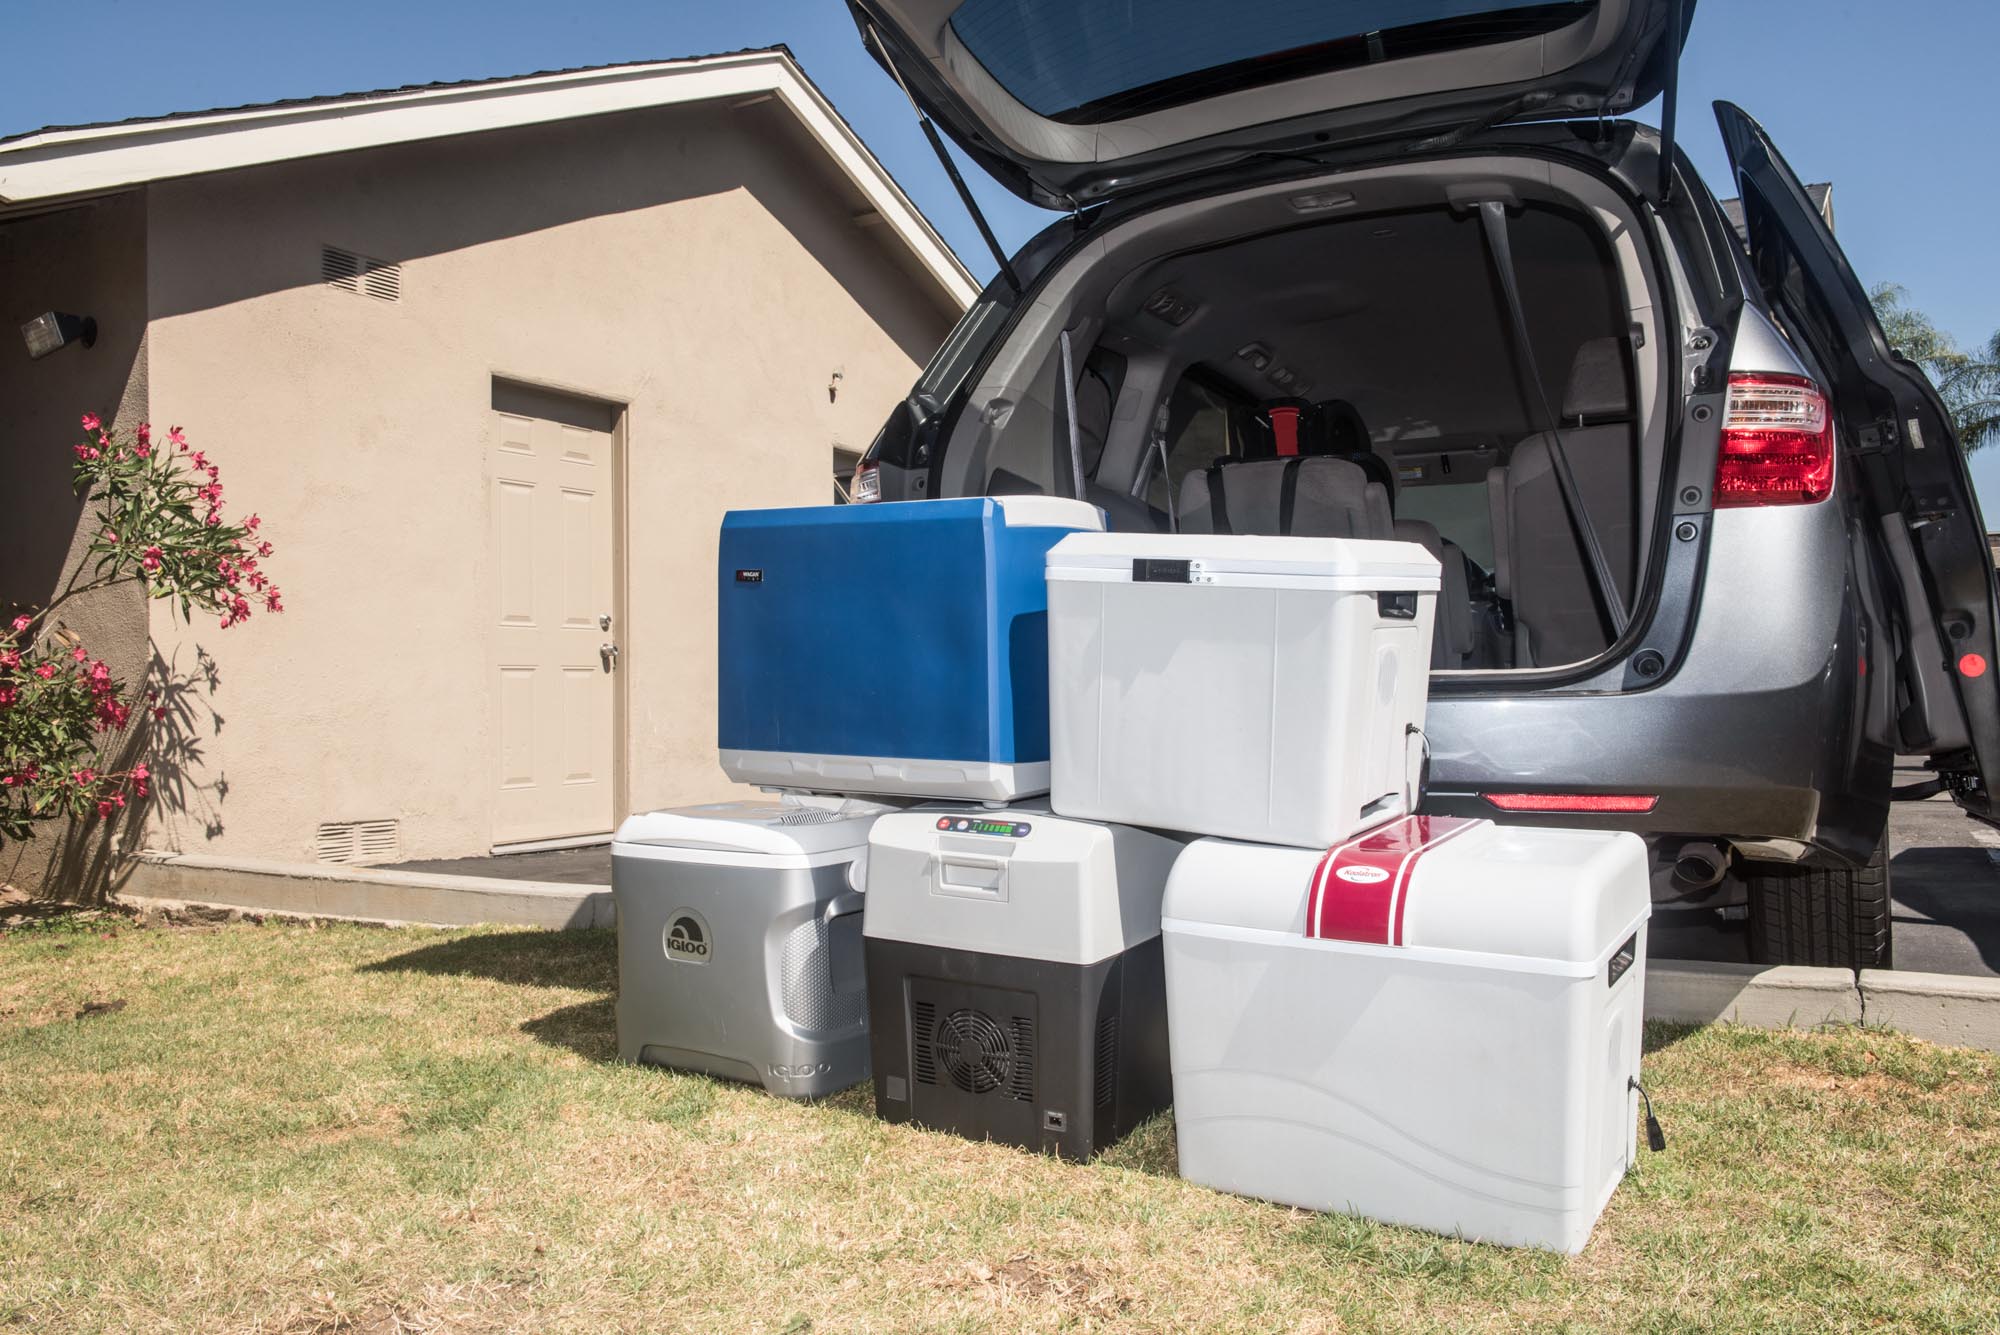 The coolers we tested